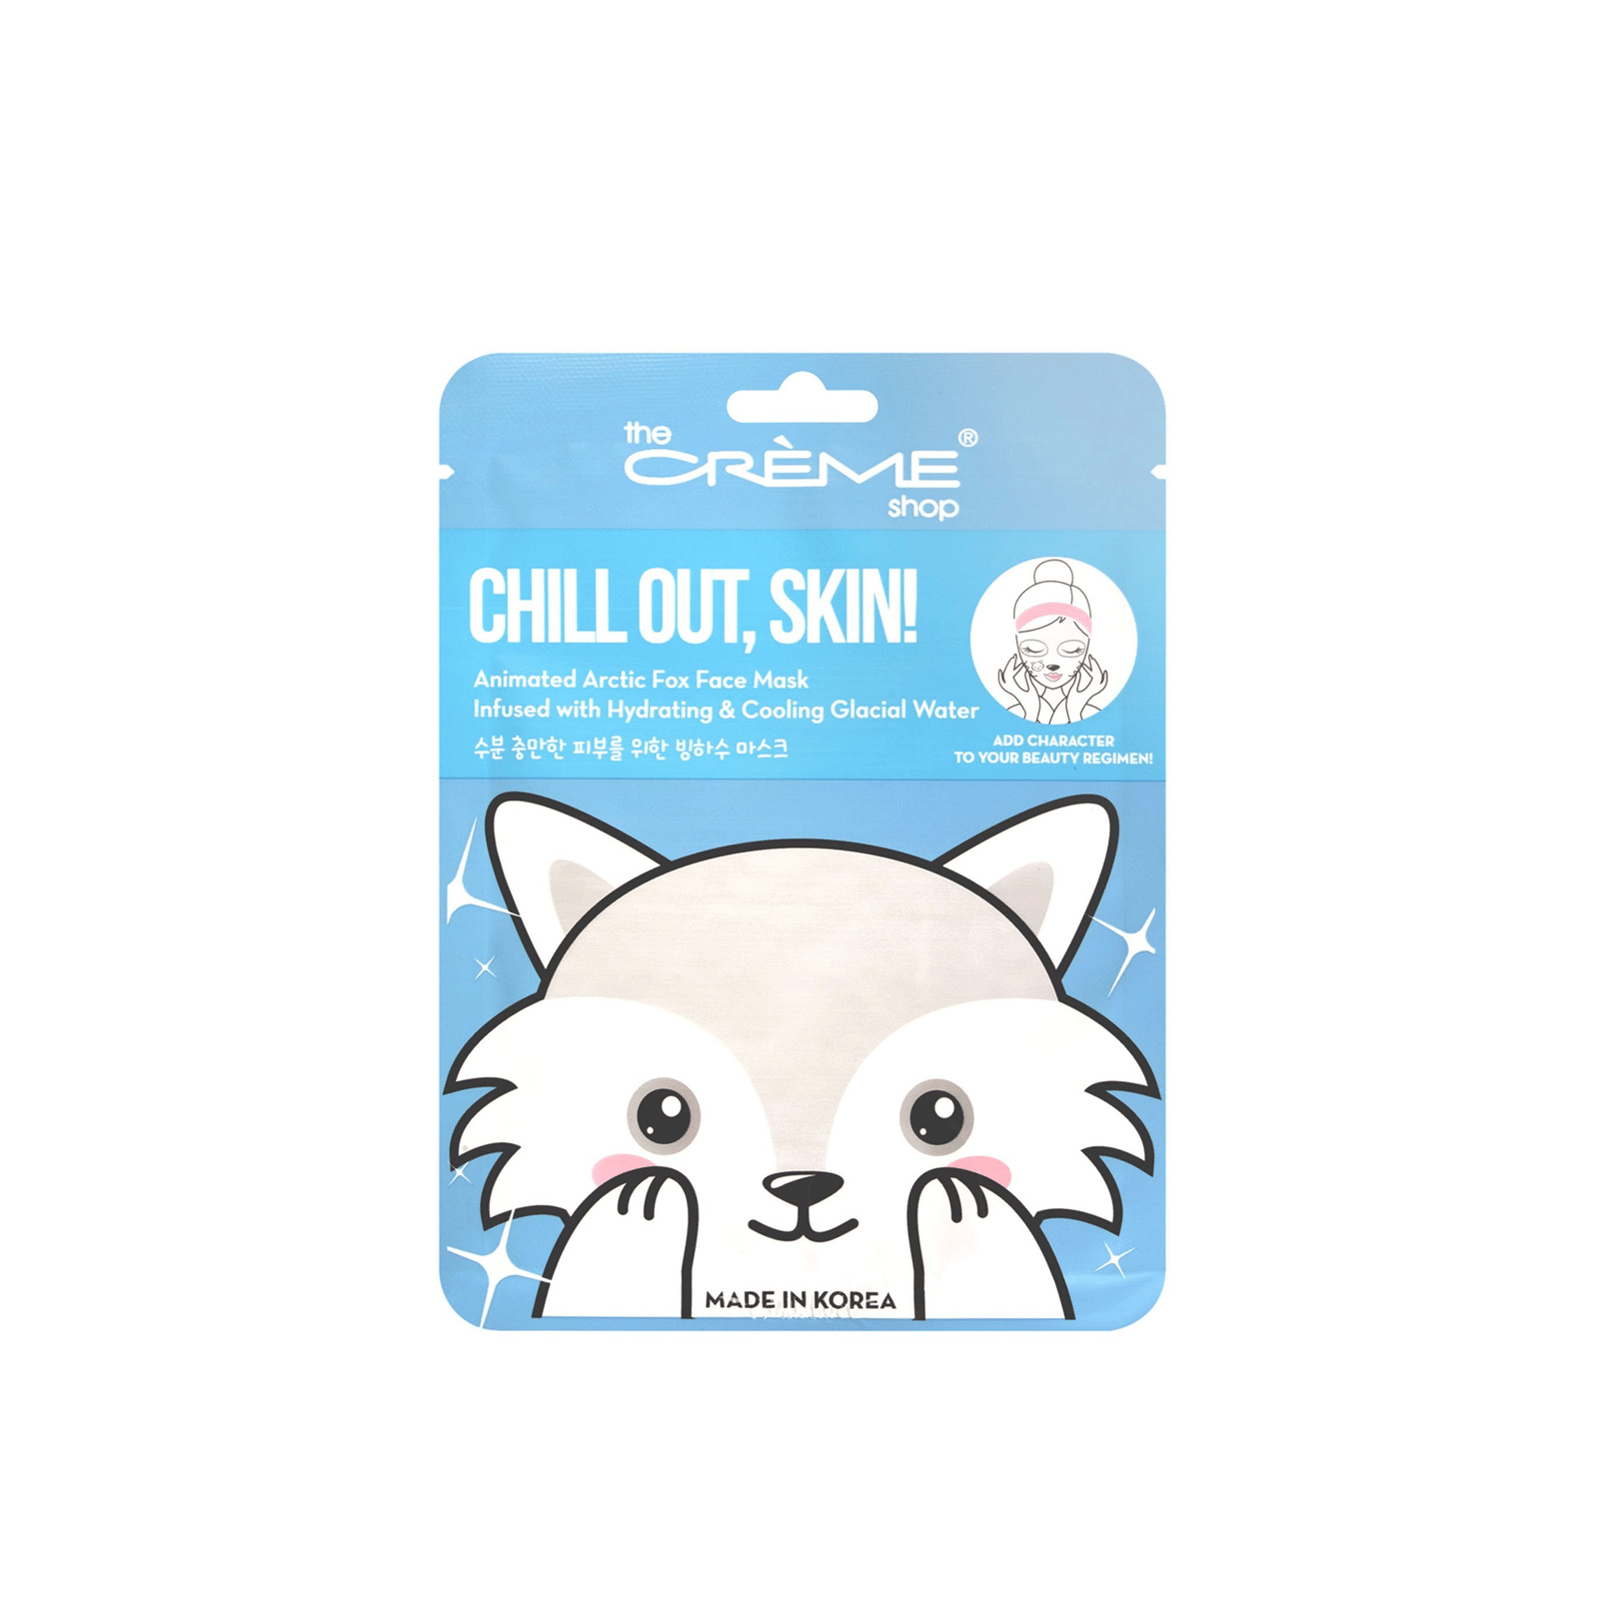 The Crème Shop Chill Out, Skin! Animated Arctic Fox Face Mask 25g